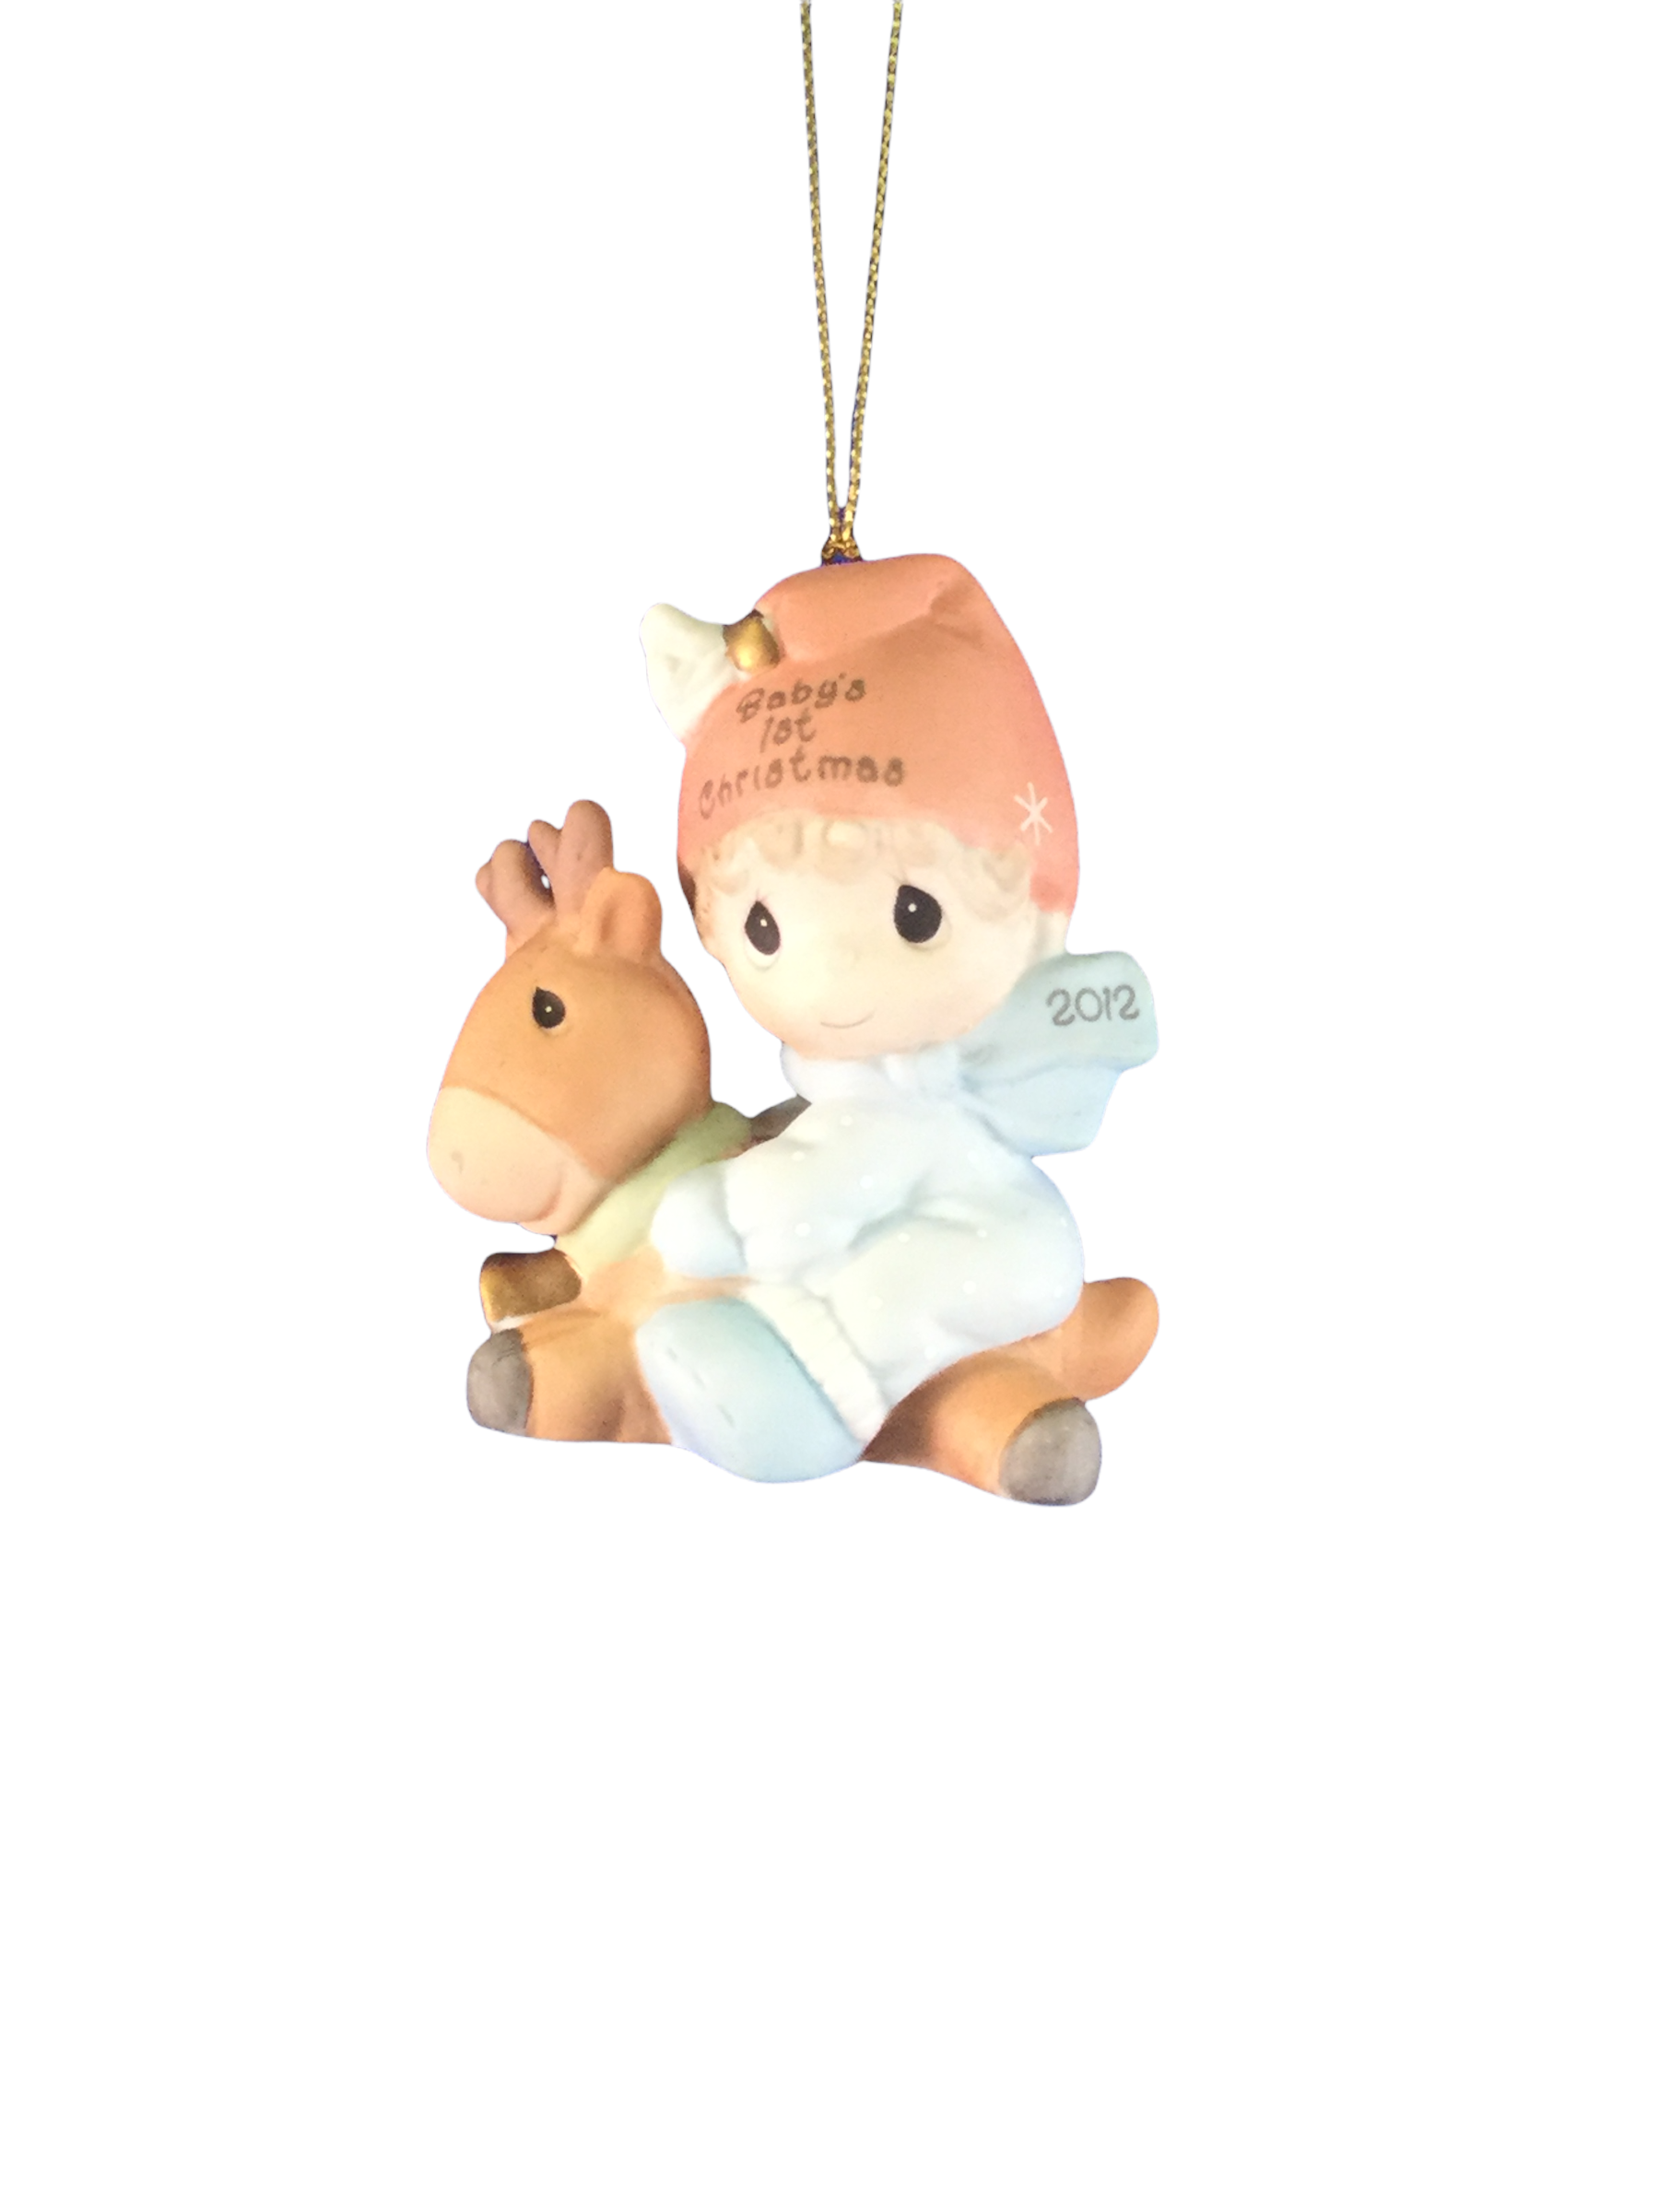 Baby's First Christmas 2012 (Boy) - Precious Moment Ornament